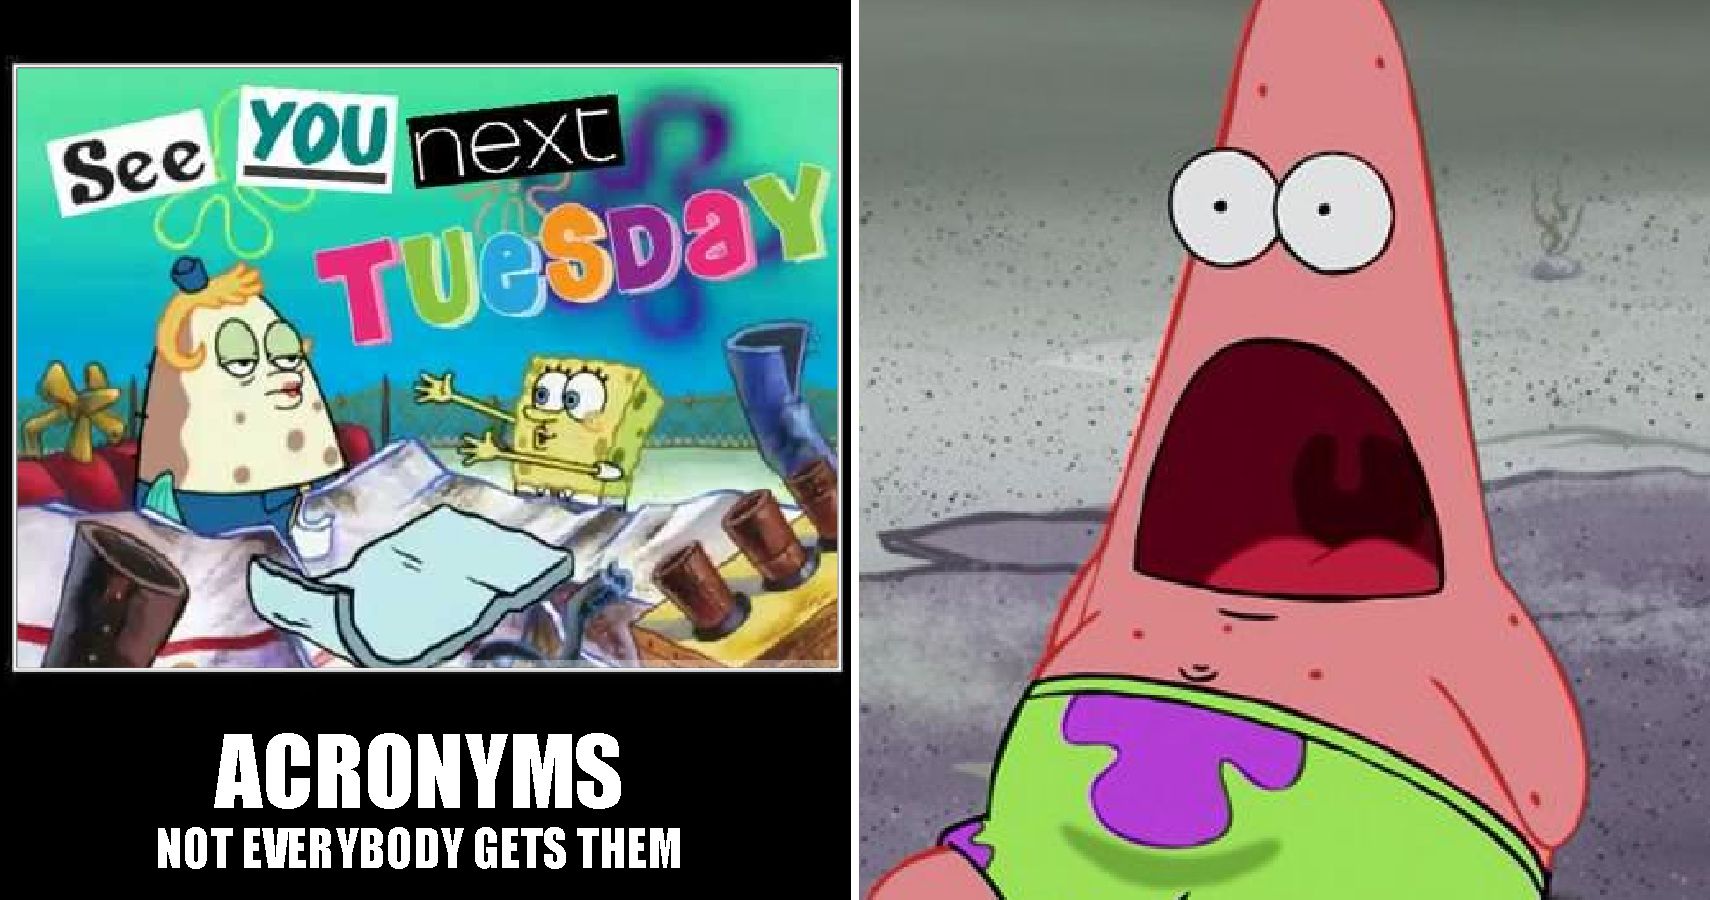 The Internet Is Trolling Again With Another Spongebob Squarepants